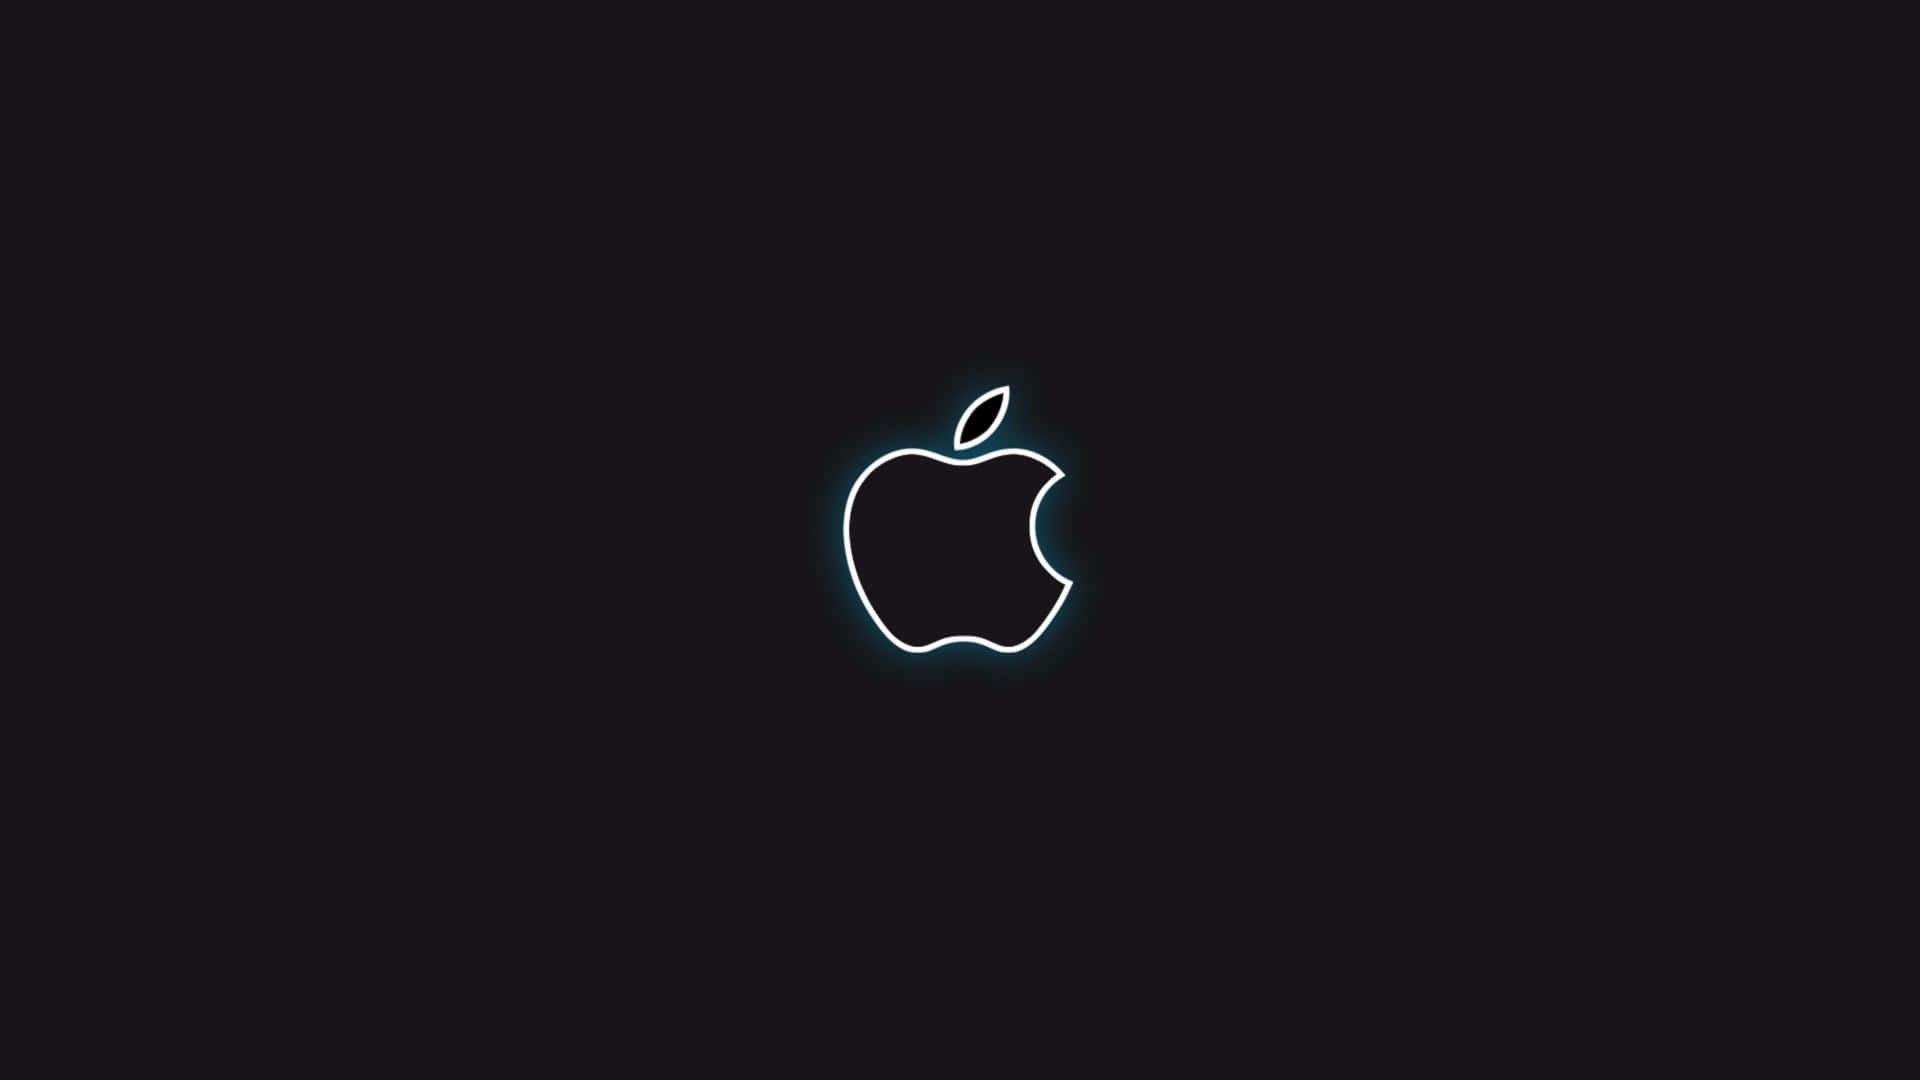 Download Black Apple Logo With White Outline Wallpaper | Wallpapers.com